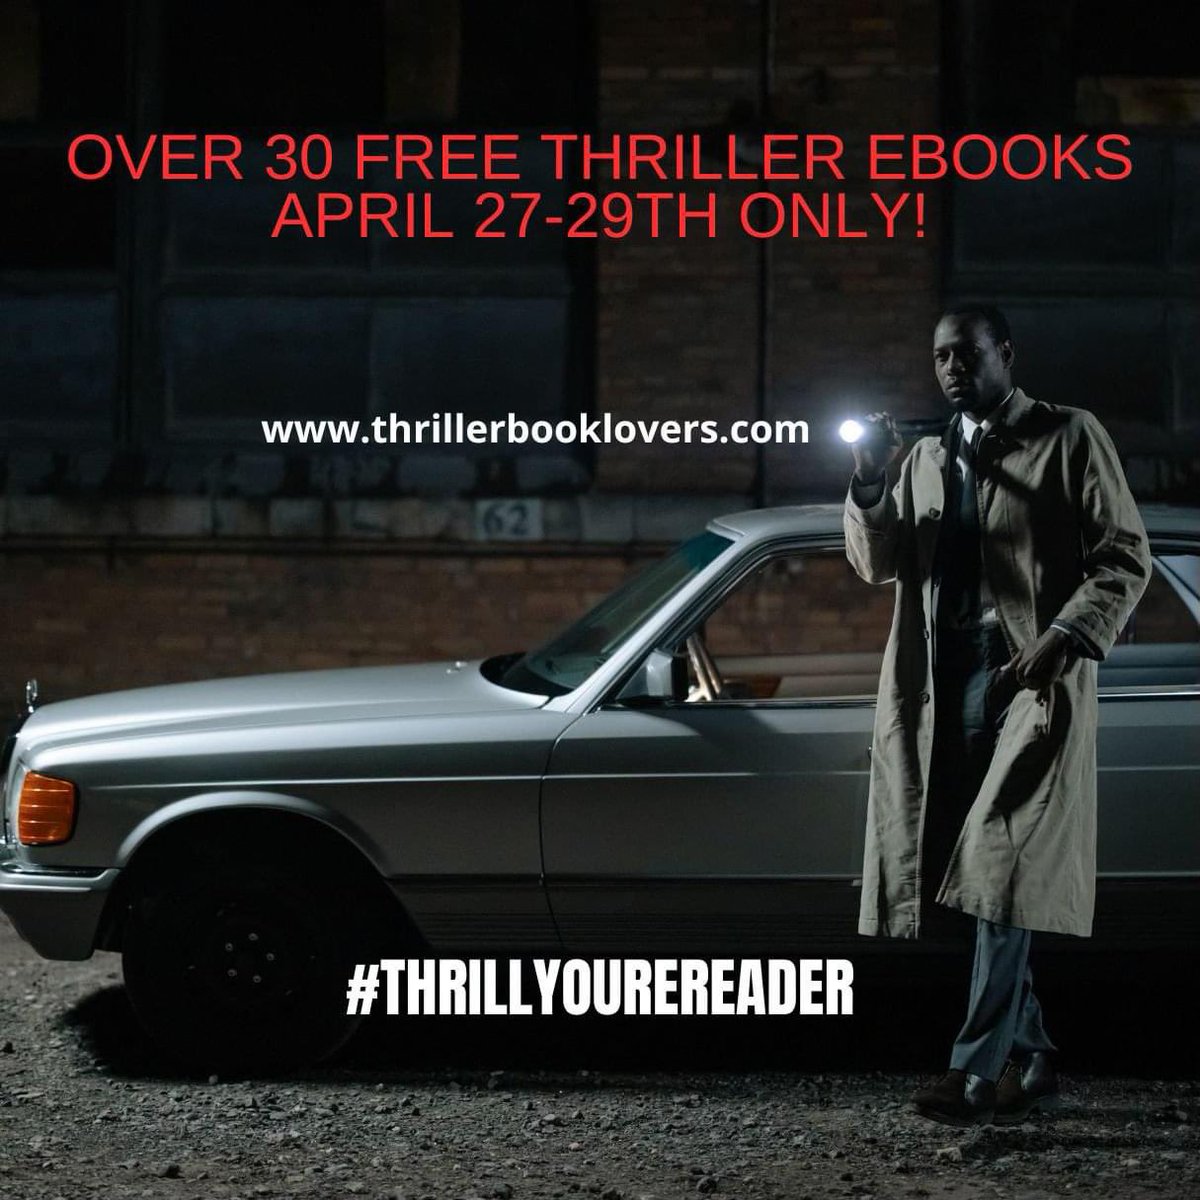 Thrill Your Reader for FREE!!!

Over 30 thrillers ready to be put on your ereader from several retailers. Don't miss out on these exciting reads.  

thrillerbooklovers.com

barnesandnoble.com/b/thrill-your-…

smashwords.com/shelves/shelf/…?

kobo.com/p/freethrillers #thrillerbooks #thrillerreads